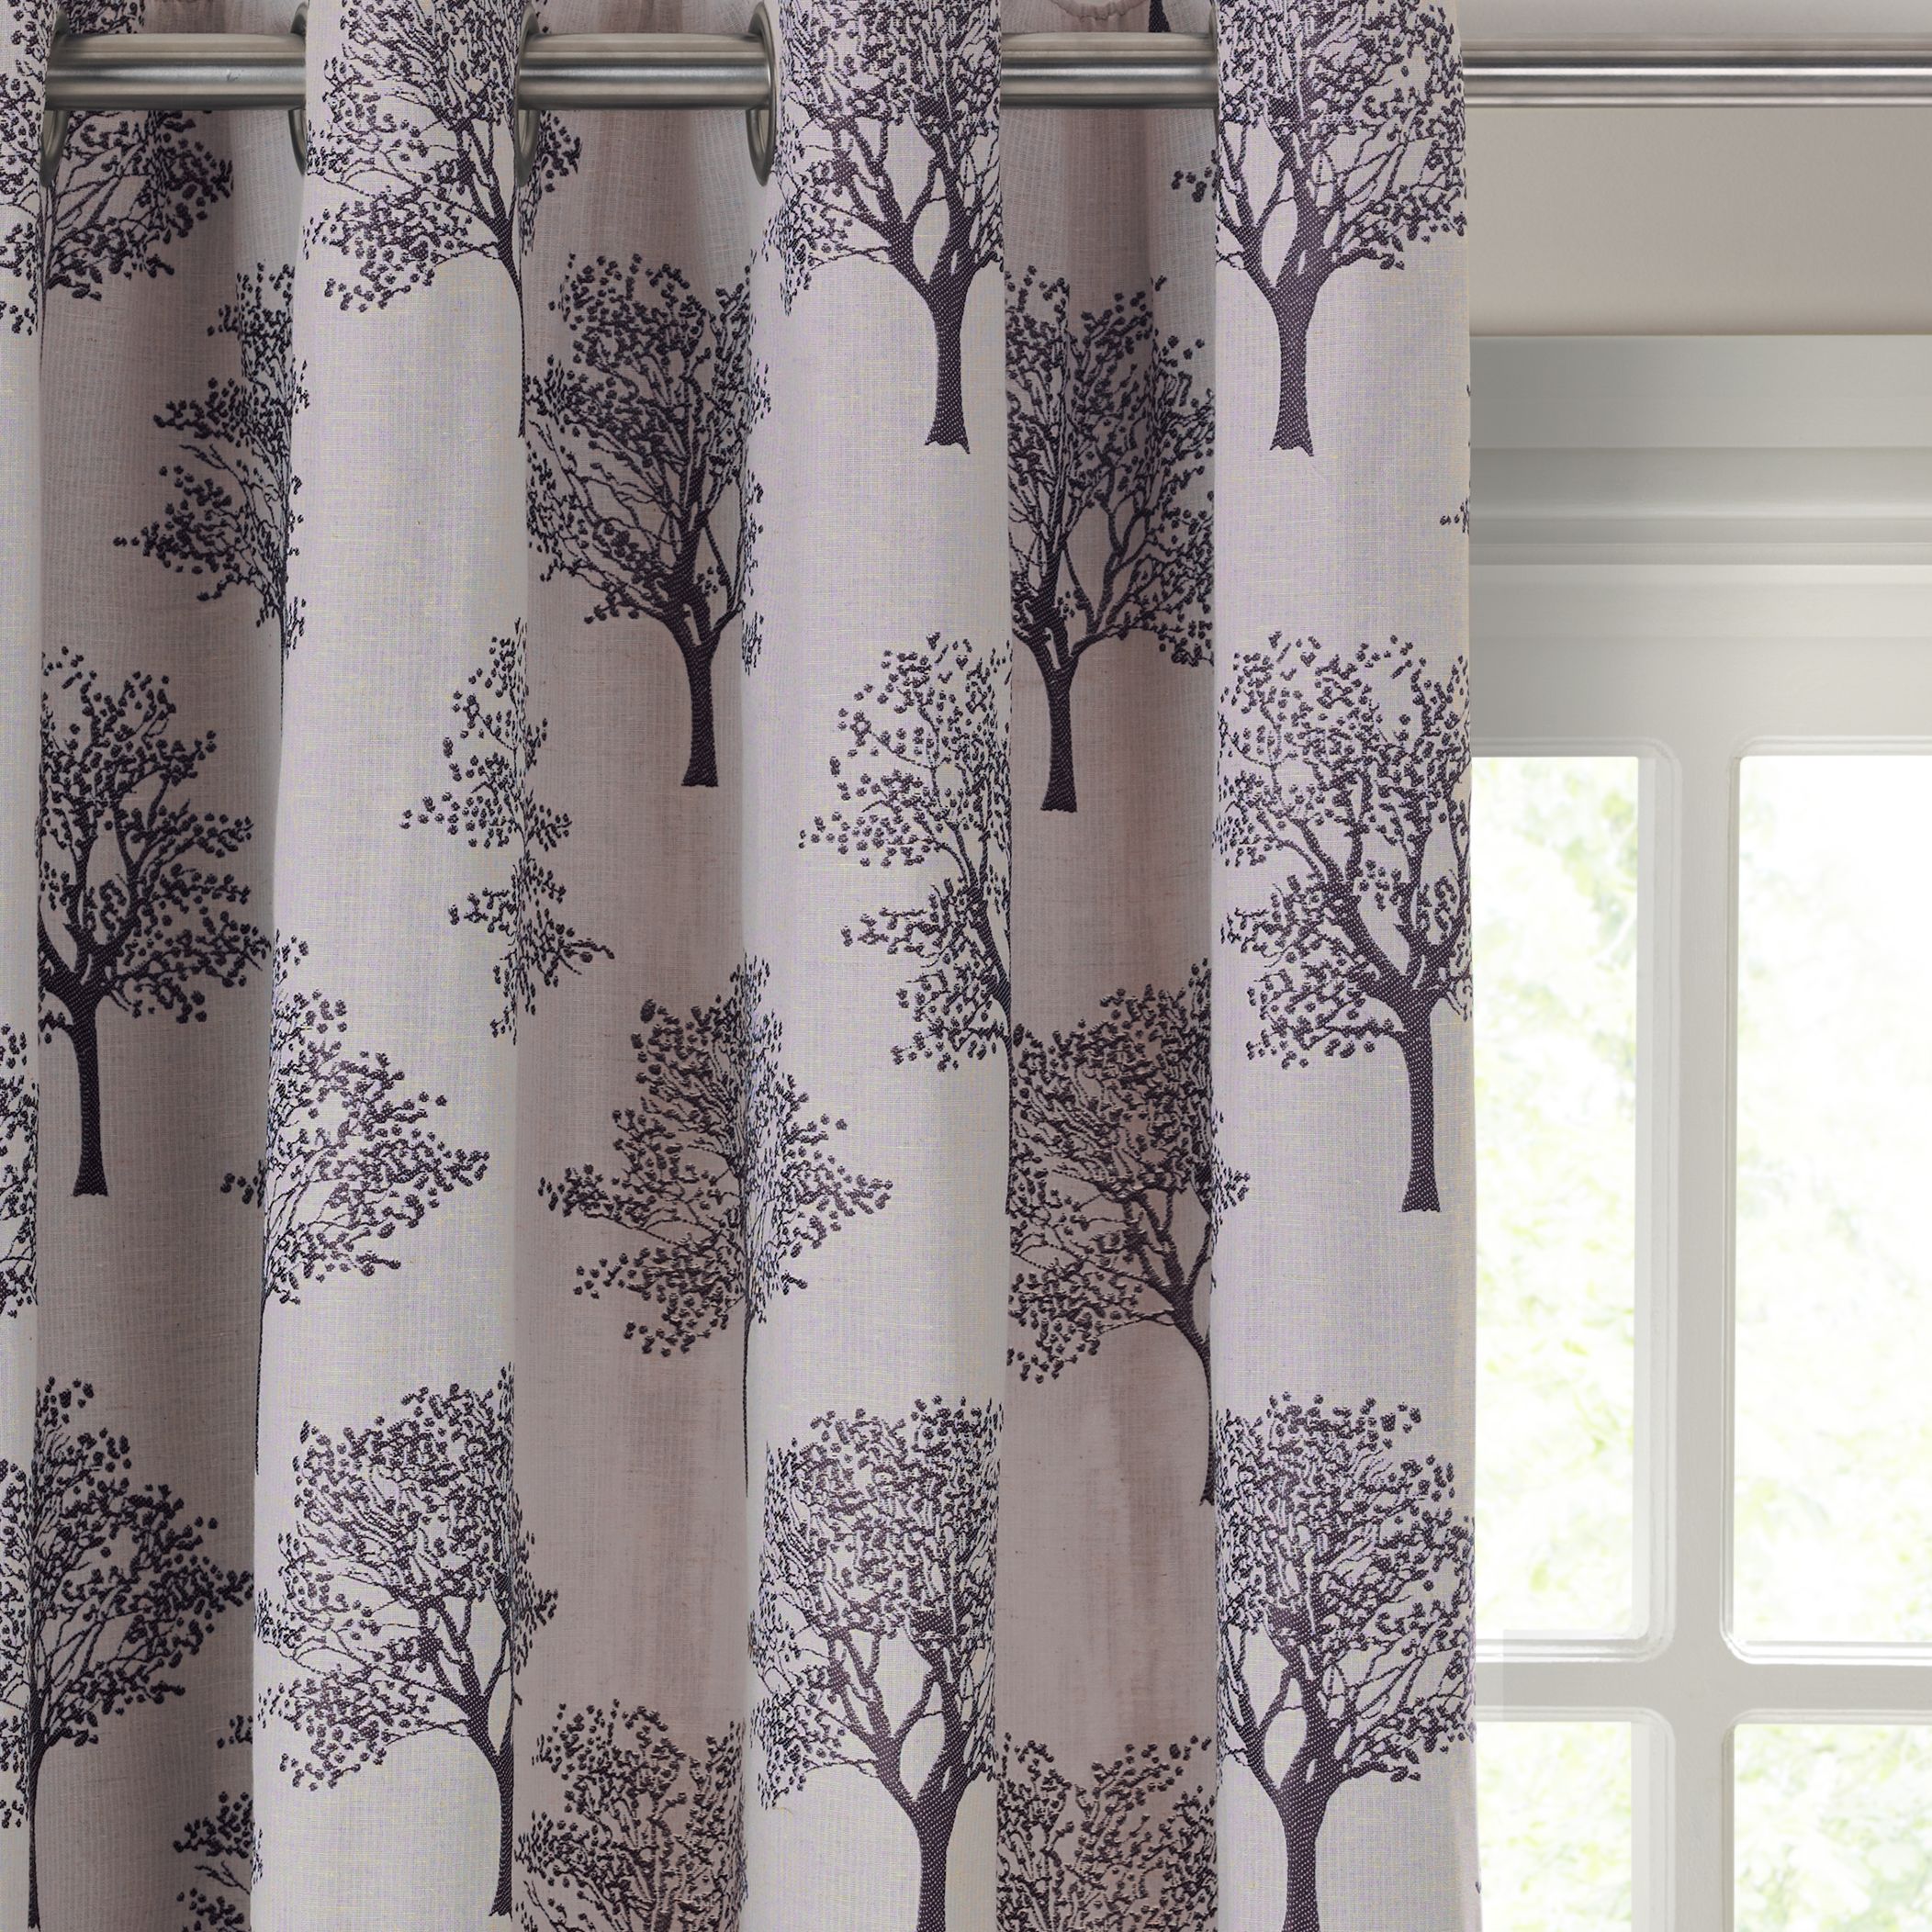 John Lewis & Partners Oakley Trees Eyelet Lined Curtains